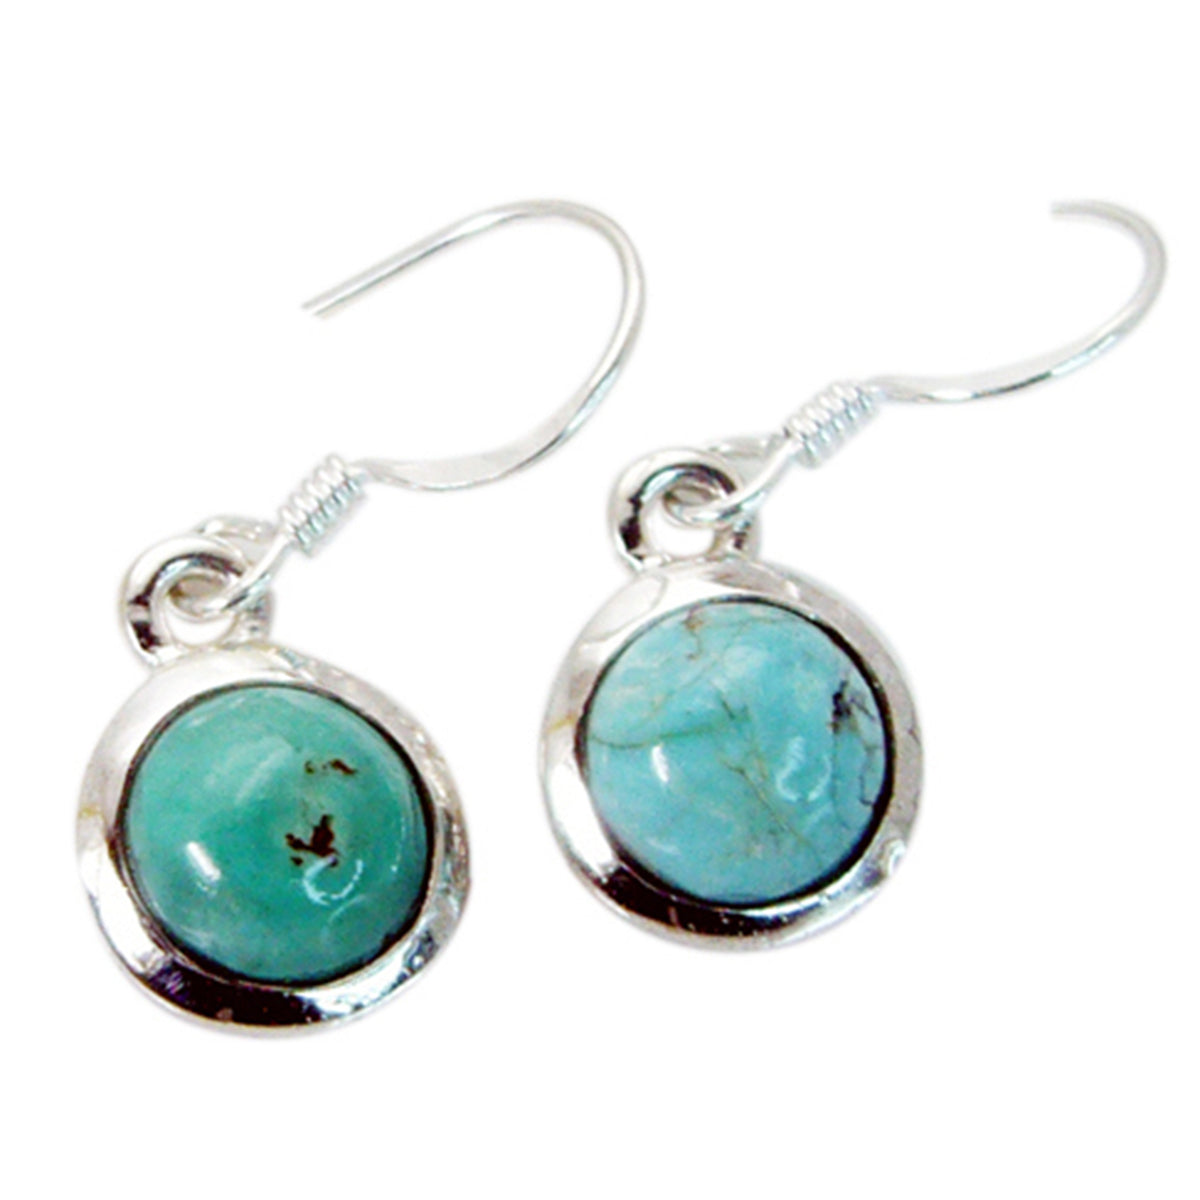 Riyo Good Gemstones round Cabochon Multi Turquoise Silver Earring gift for anniversary